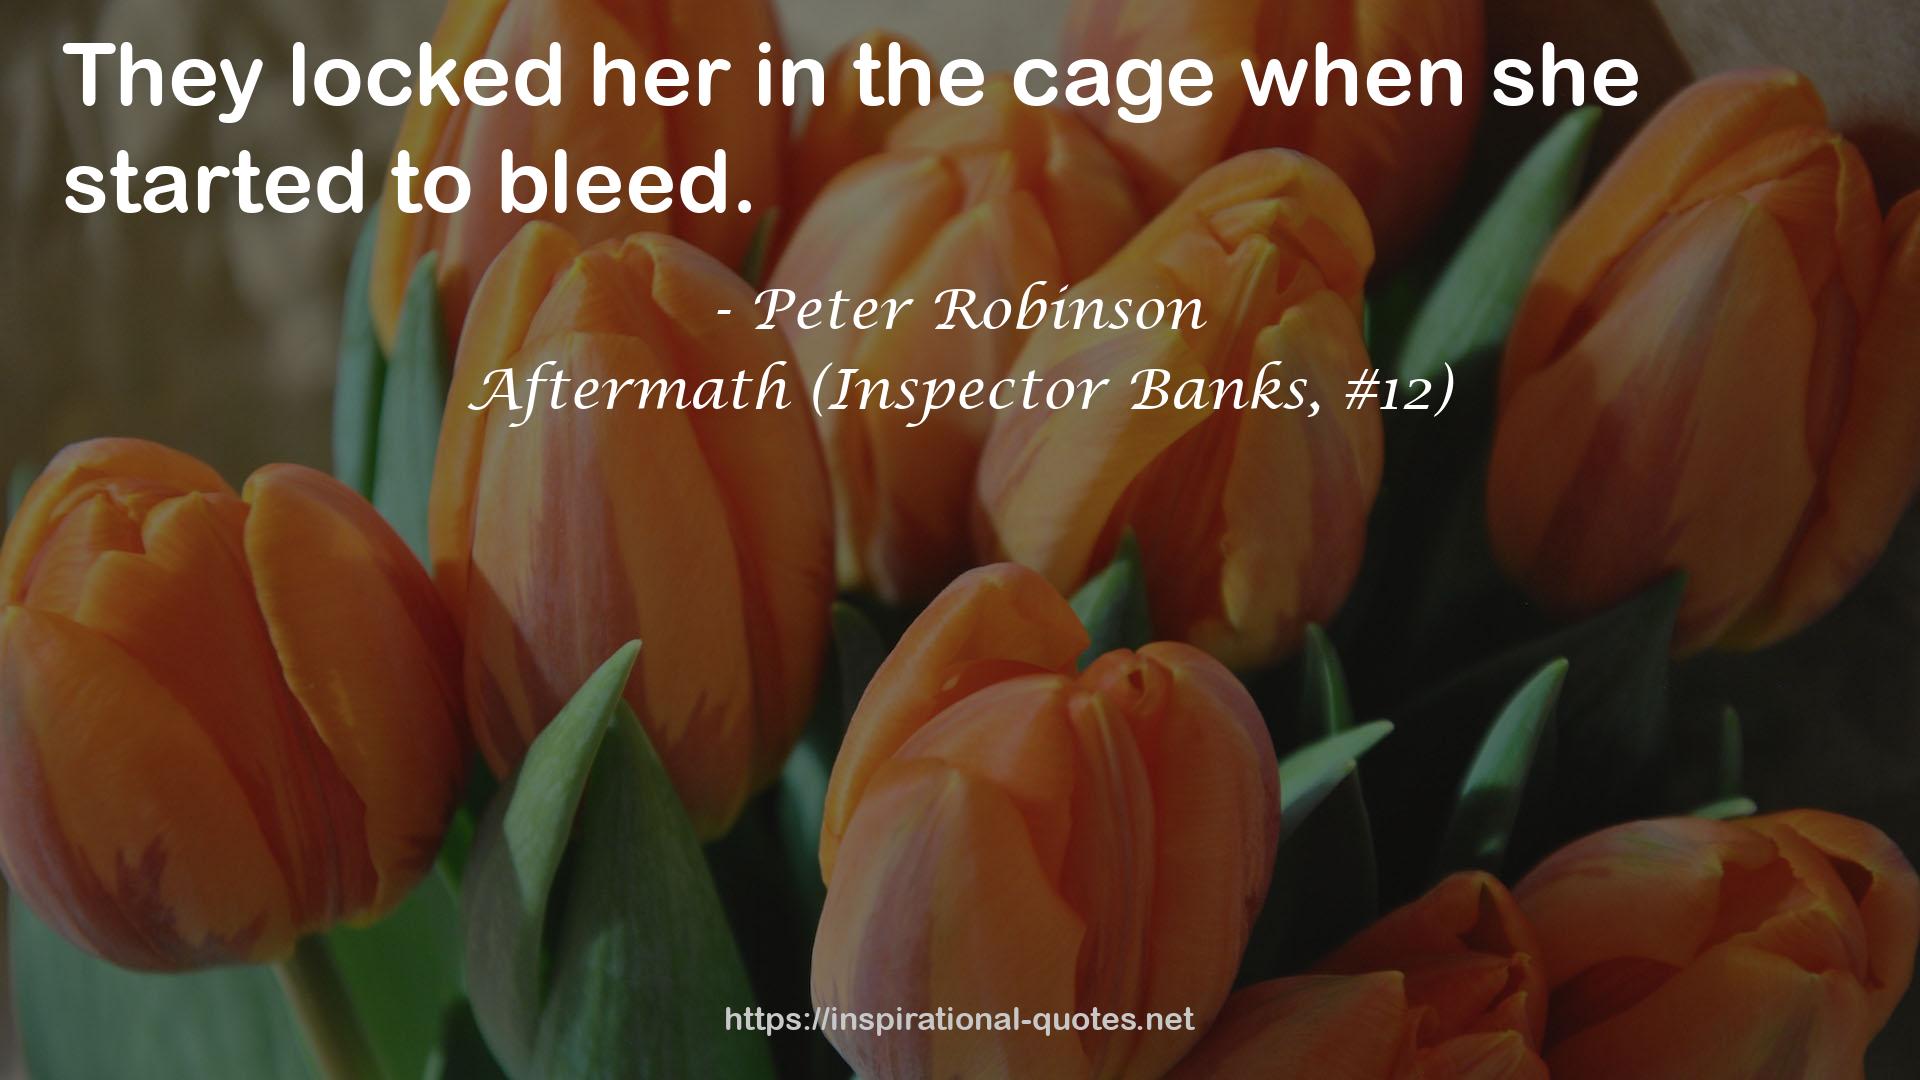 Aftermath (Inspector Banks, #12) QUOTES